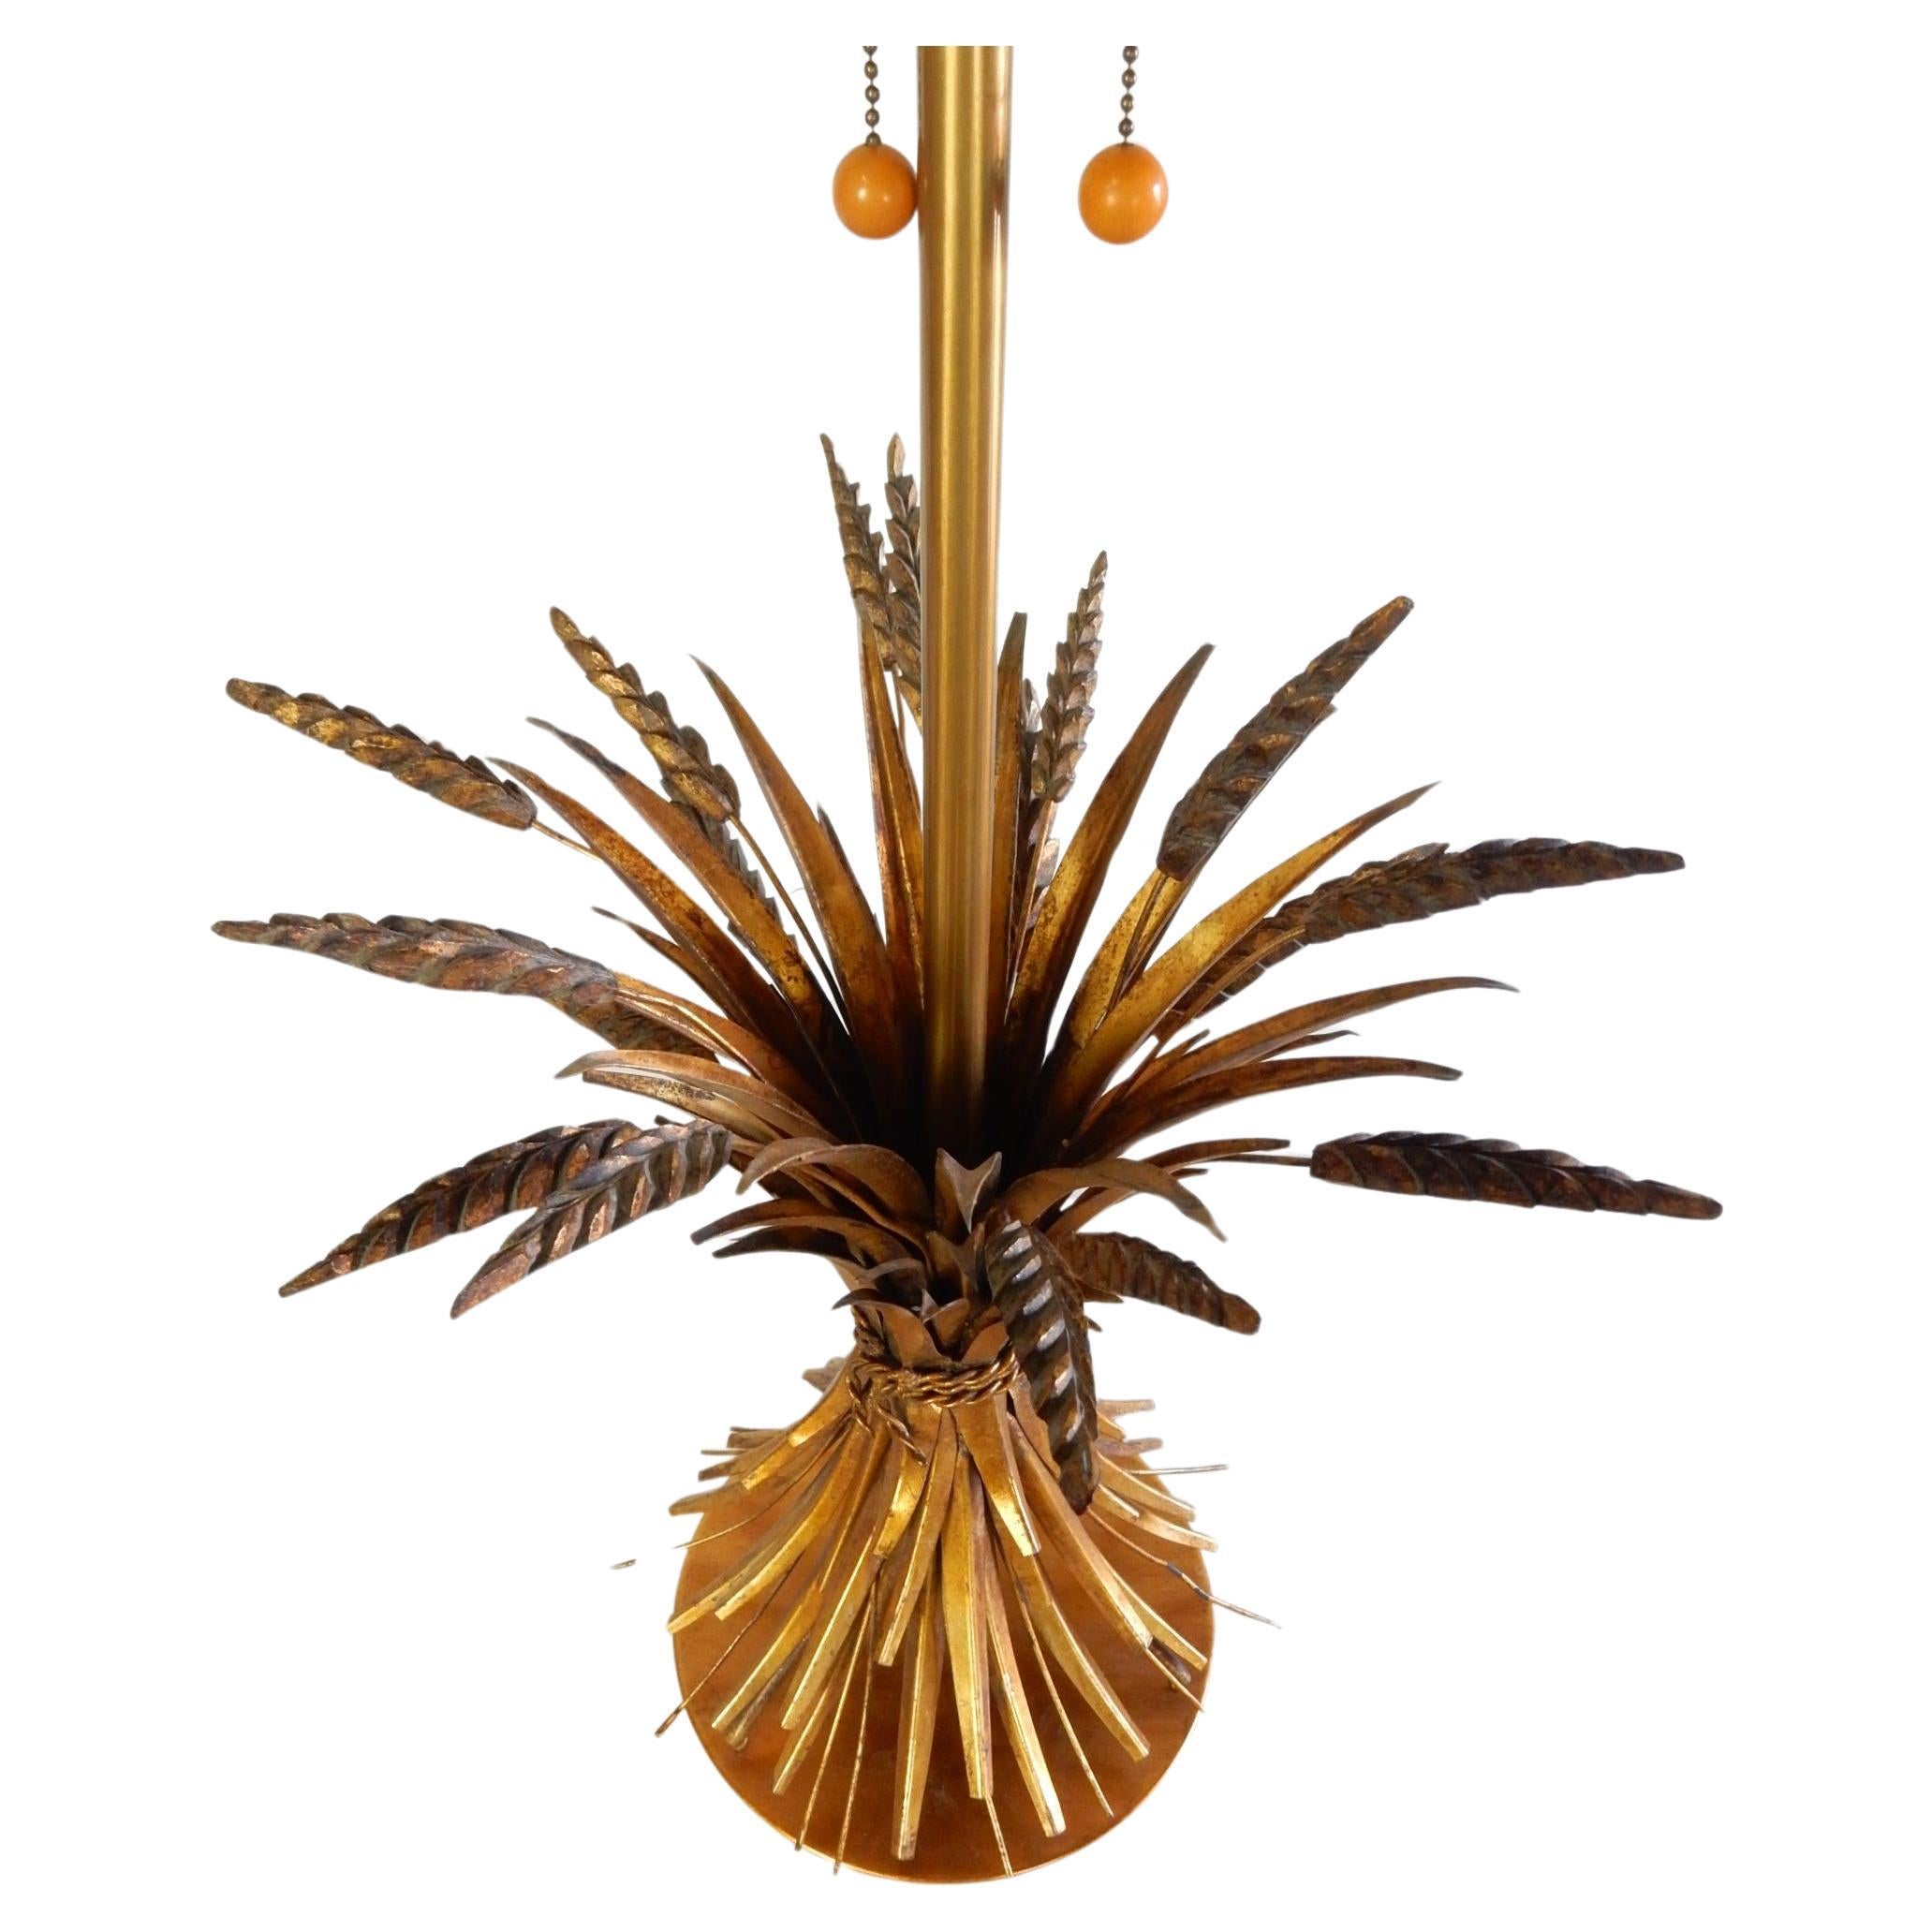 Exquisite pair of ~Sheaf of Wheat~ table lamps designed by the Marbro Lamp Company of Los Angeles circa 1960.
These are exceptional large-scale table lamps made of metal with gold gilt enamel. Adds sophistication to any style decor. 
Includes their